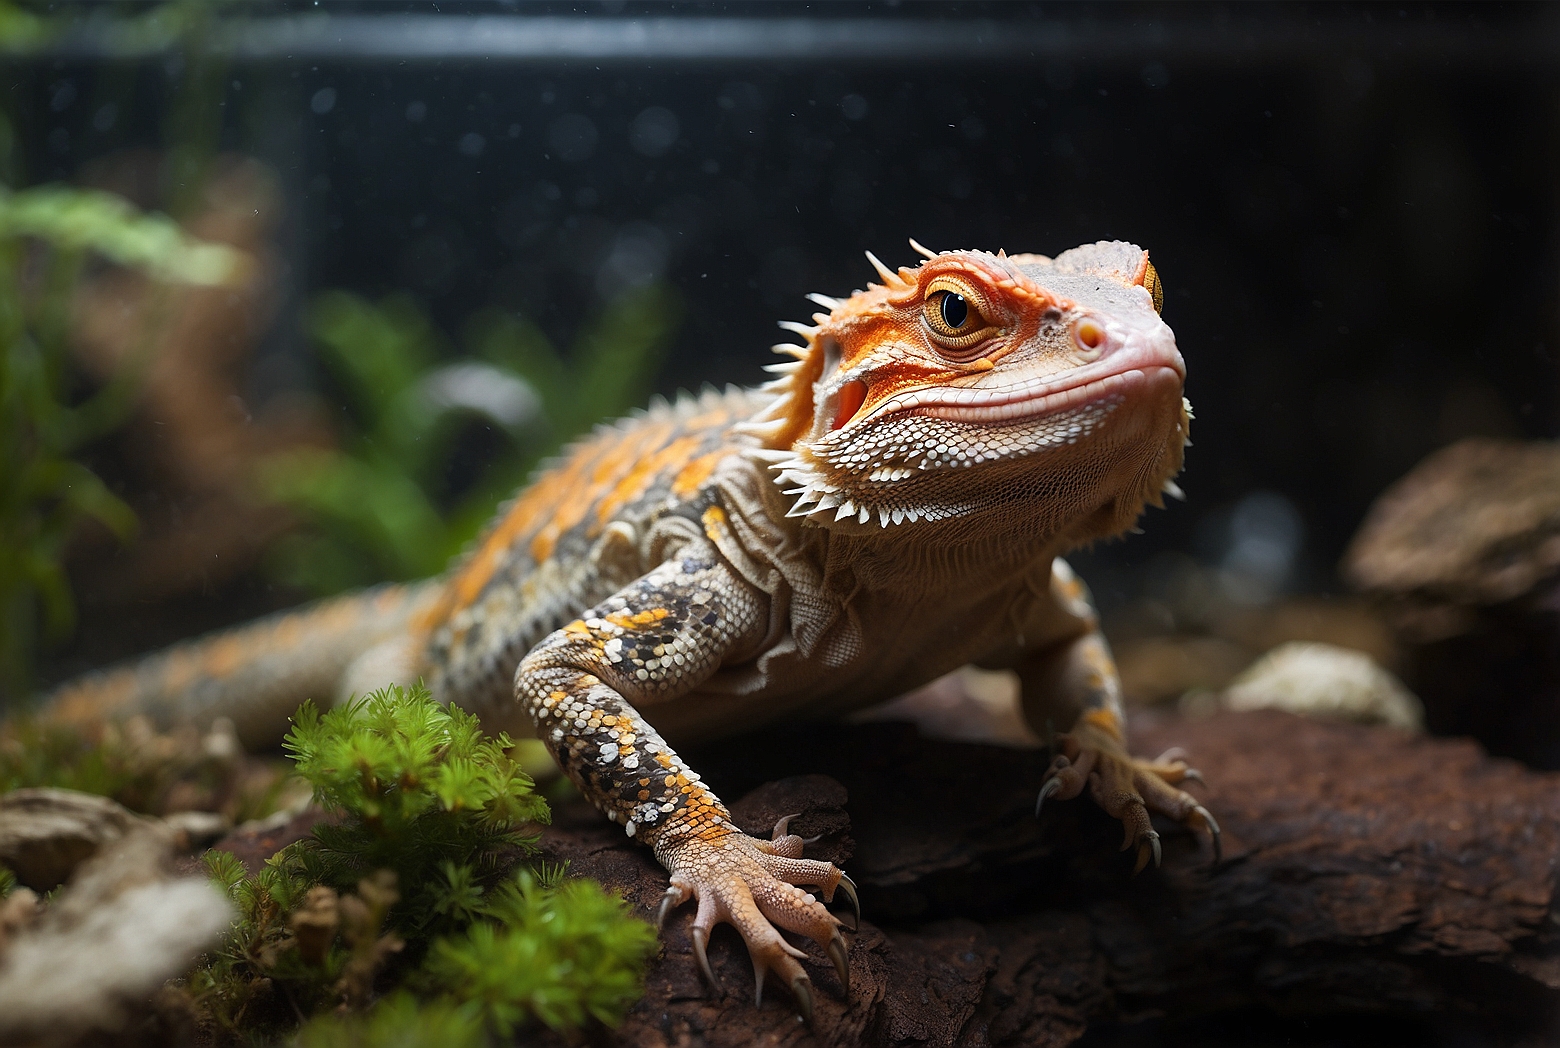 How Long Can A Bearded Dragon Live In A 40 Gallon Tank?